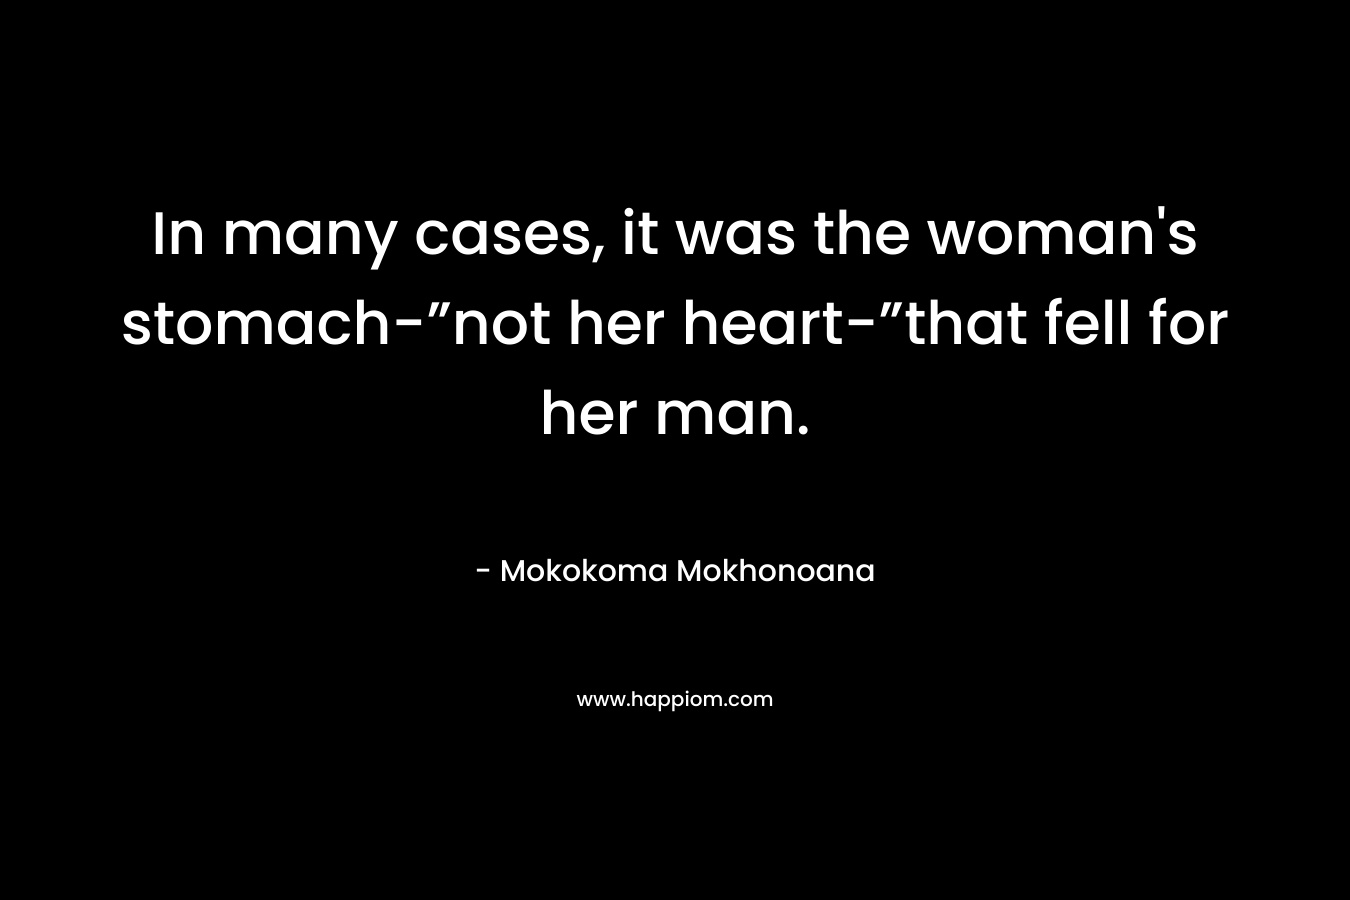 In many cases, it was the woman’s stomach-”not her heart-”that fell for her man. – Mokokoma Mokhonoana